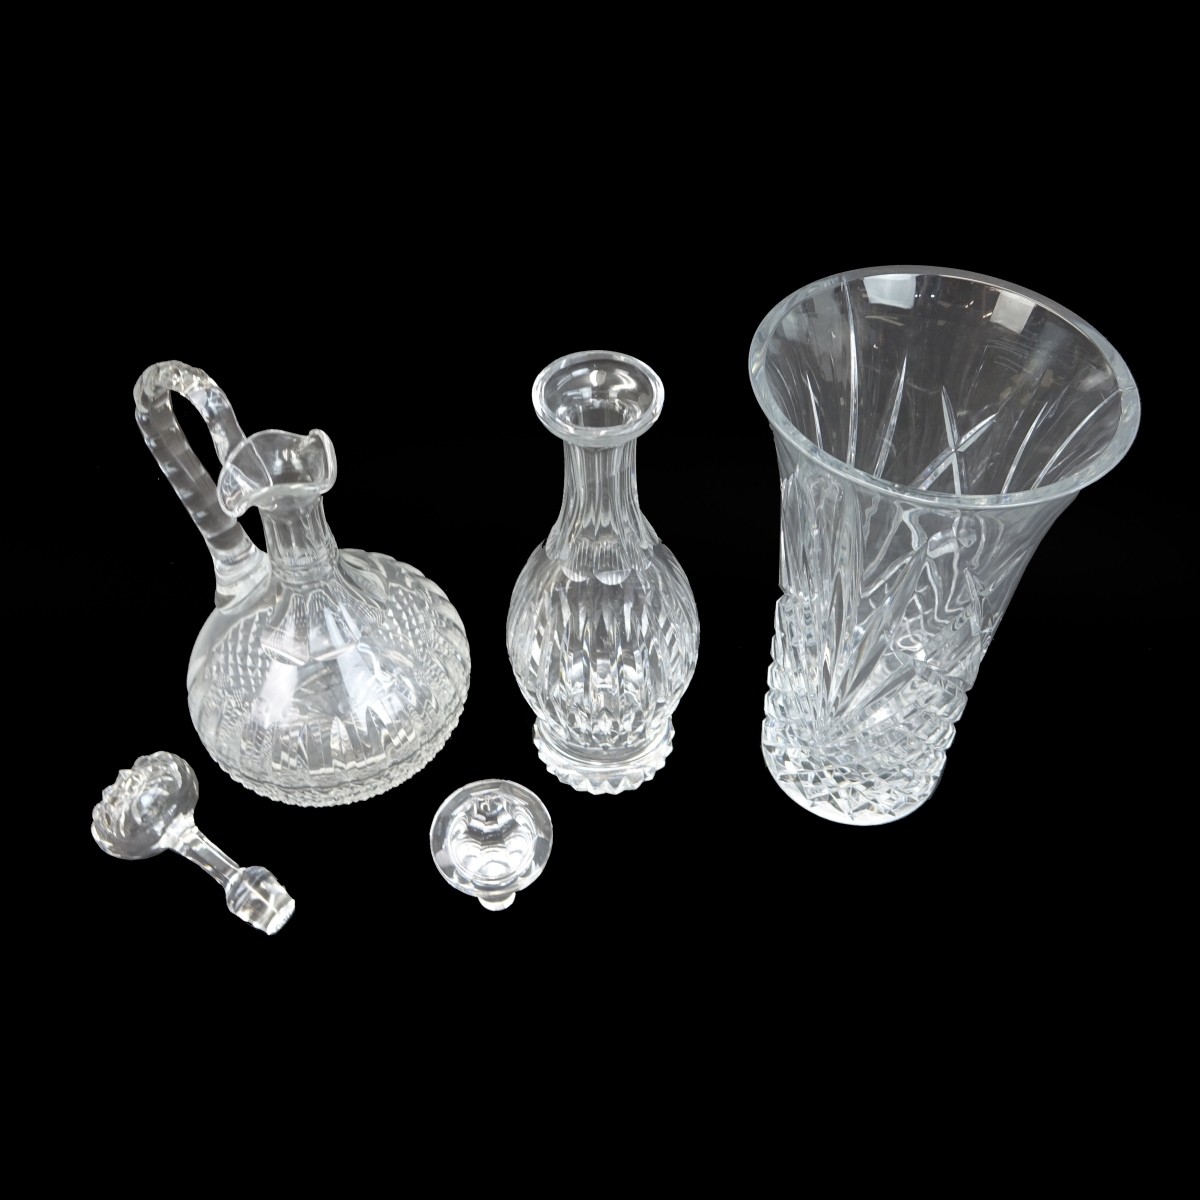 3 pcs Crystal Waterford style Barware